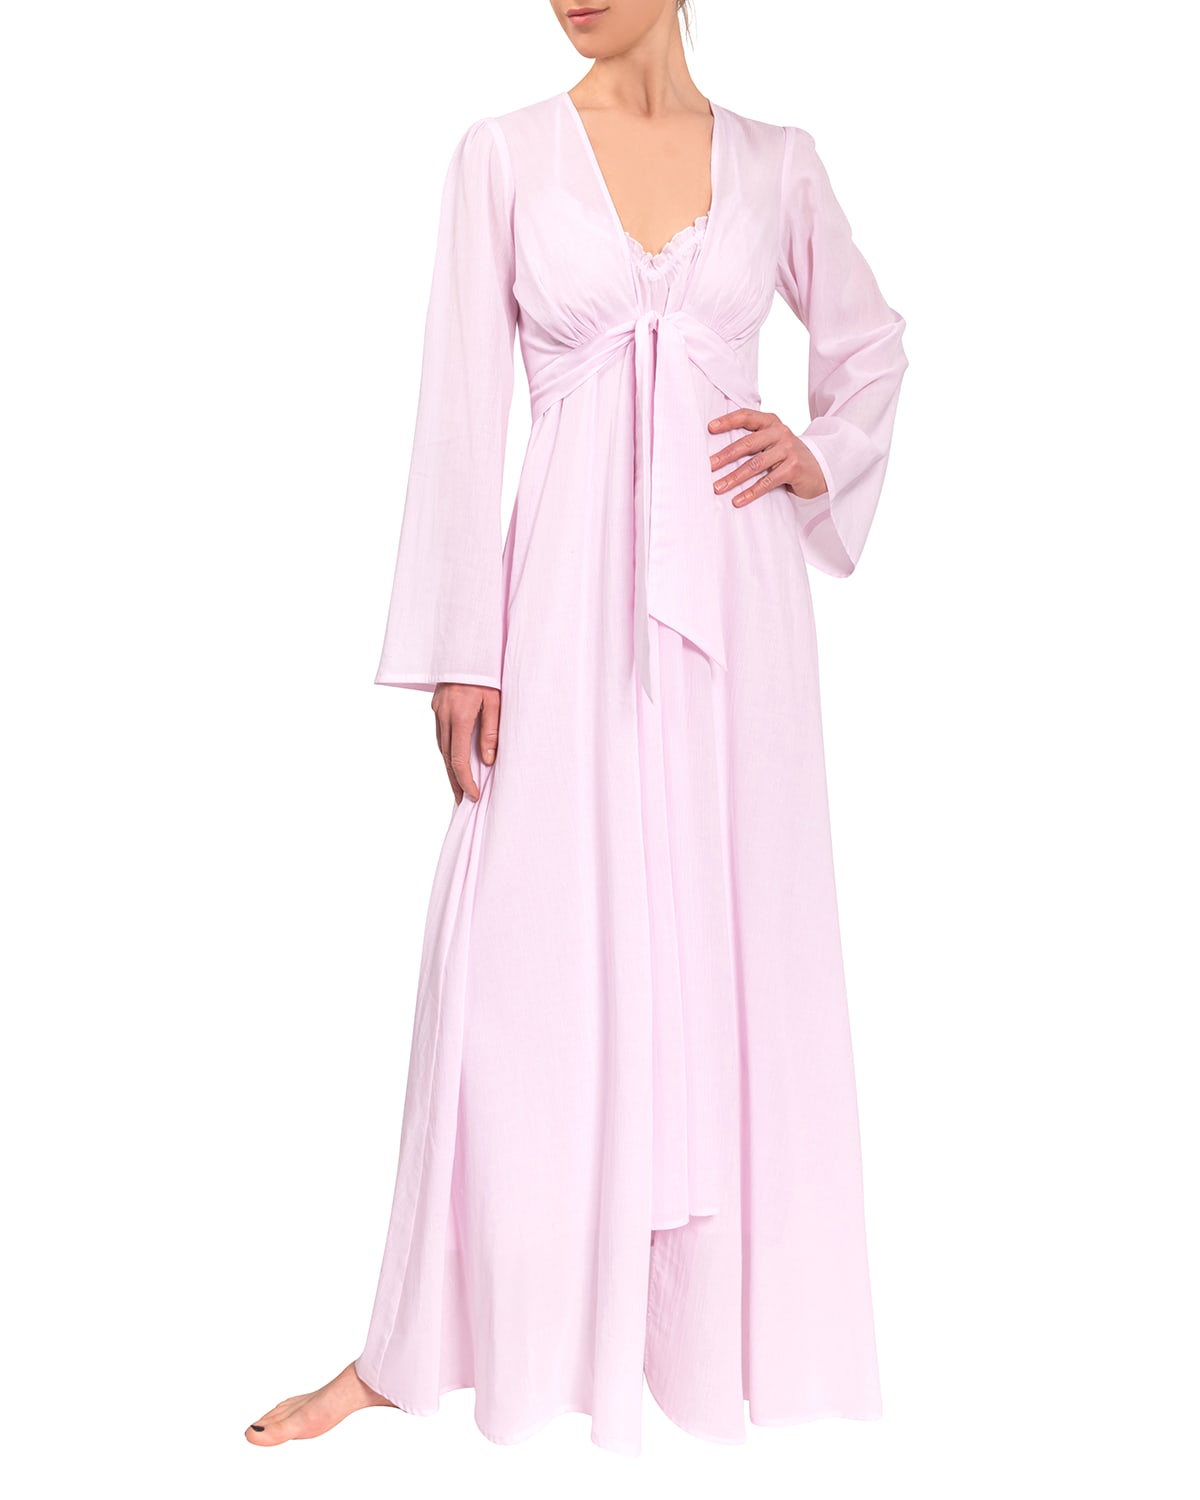 EVERYDAY RITUAL DIANA TIE-FRONT LONG COTTON ROBE,PROD239910207